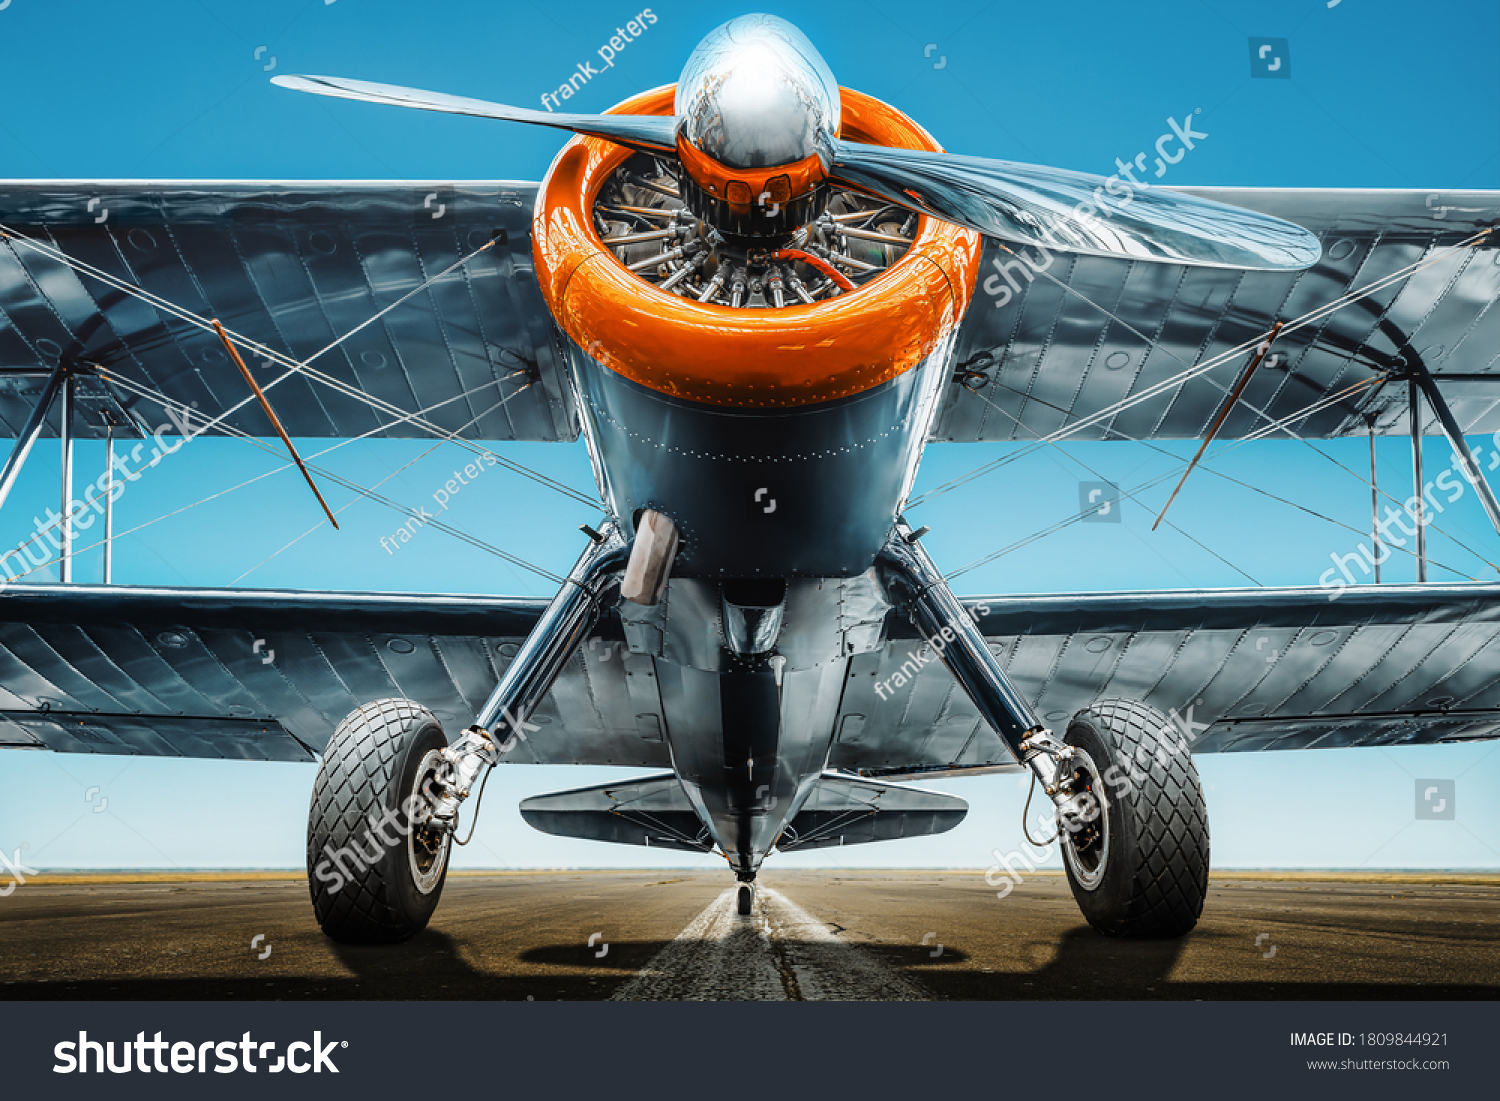 sports plane on a runway ready for take off #1809844921